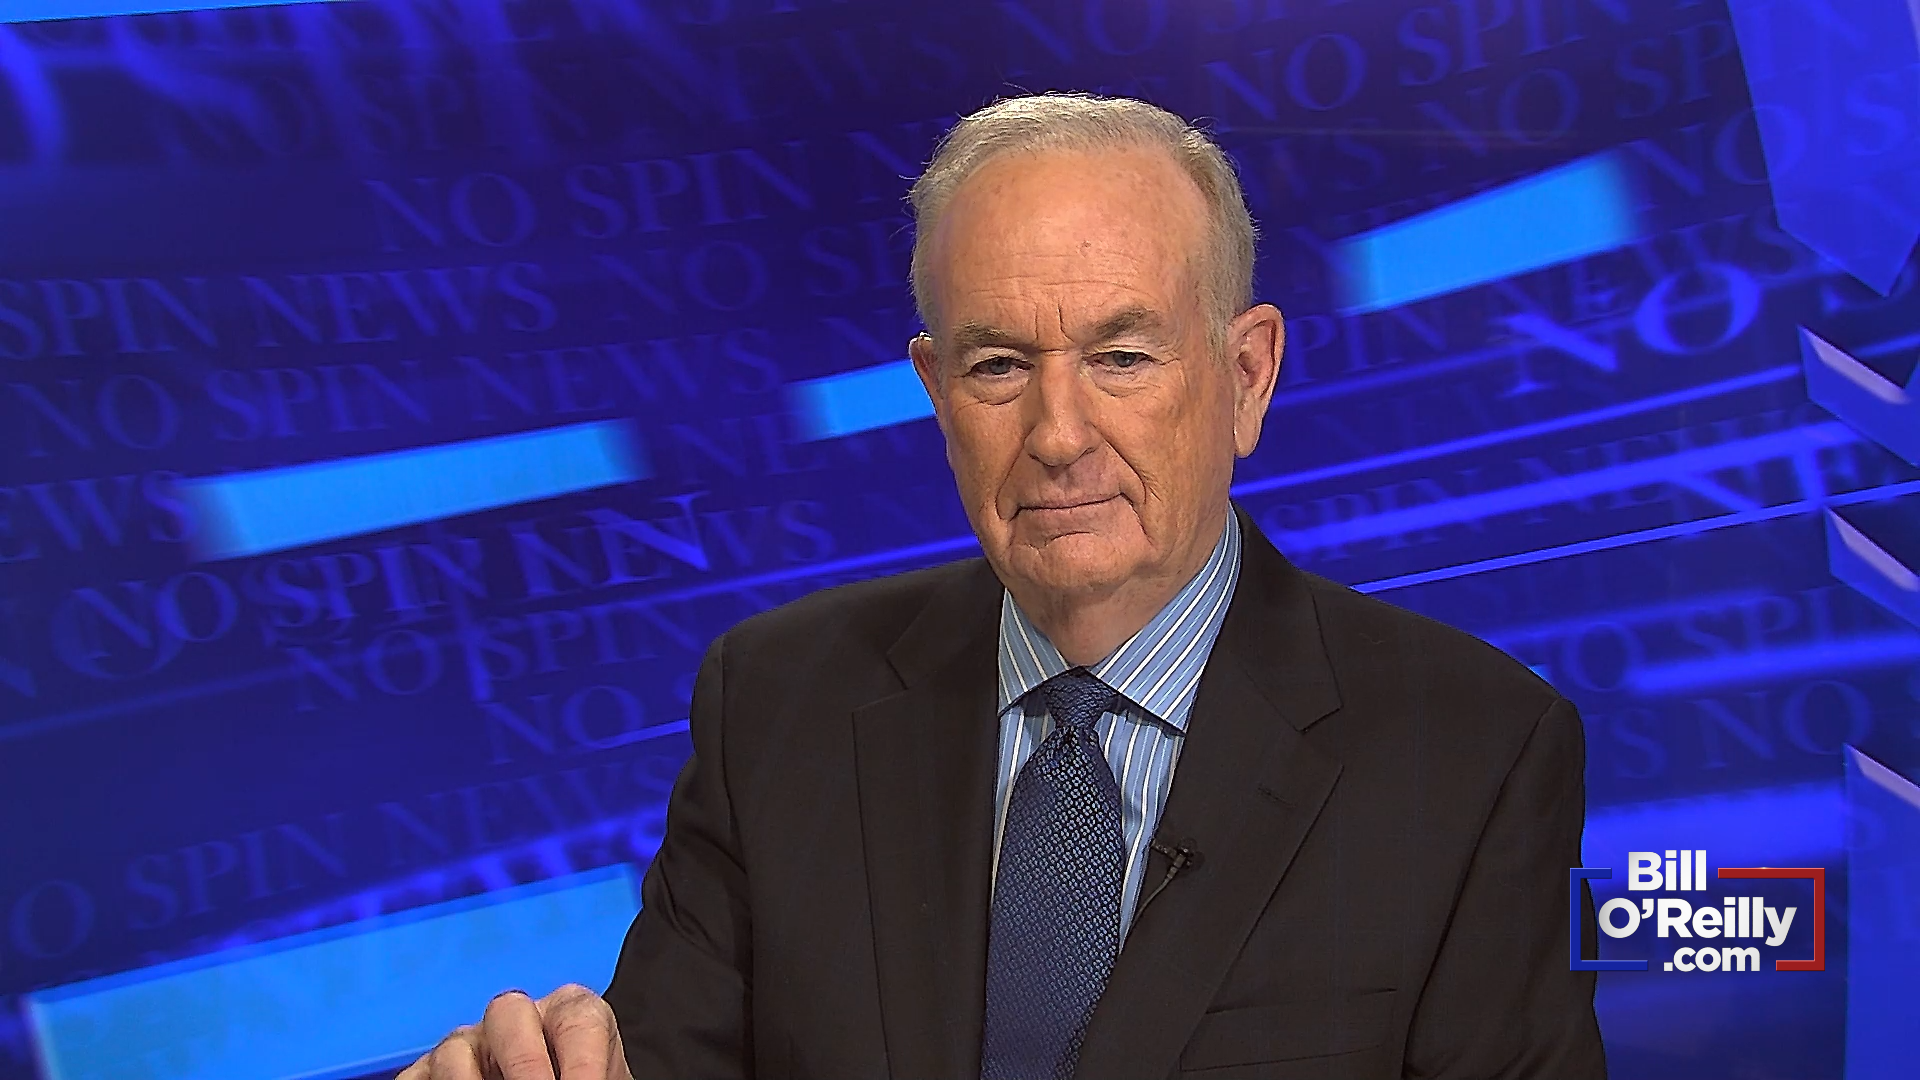 O'Reilly Encourages Viewers To Keep A Sense Of Humor During These Tumultuous Times